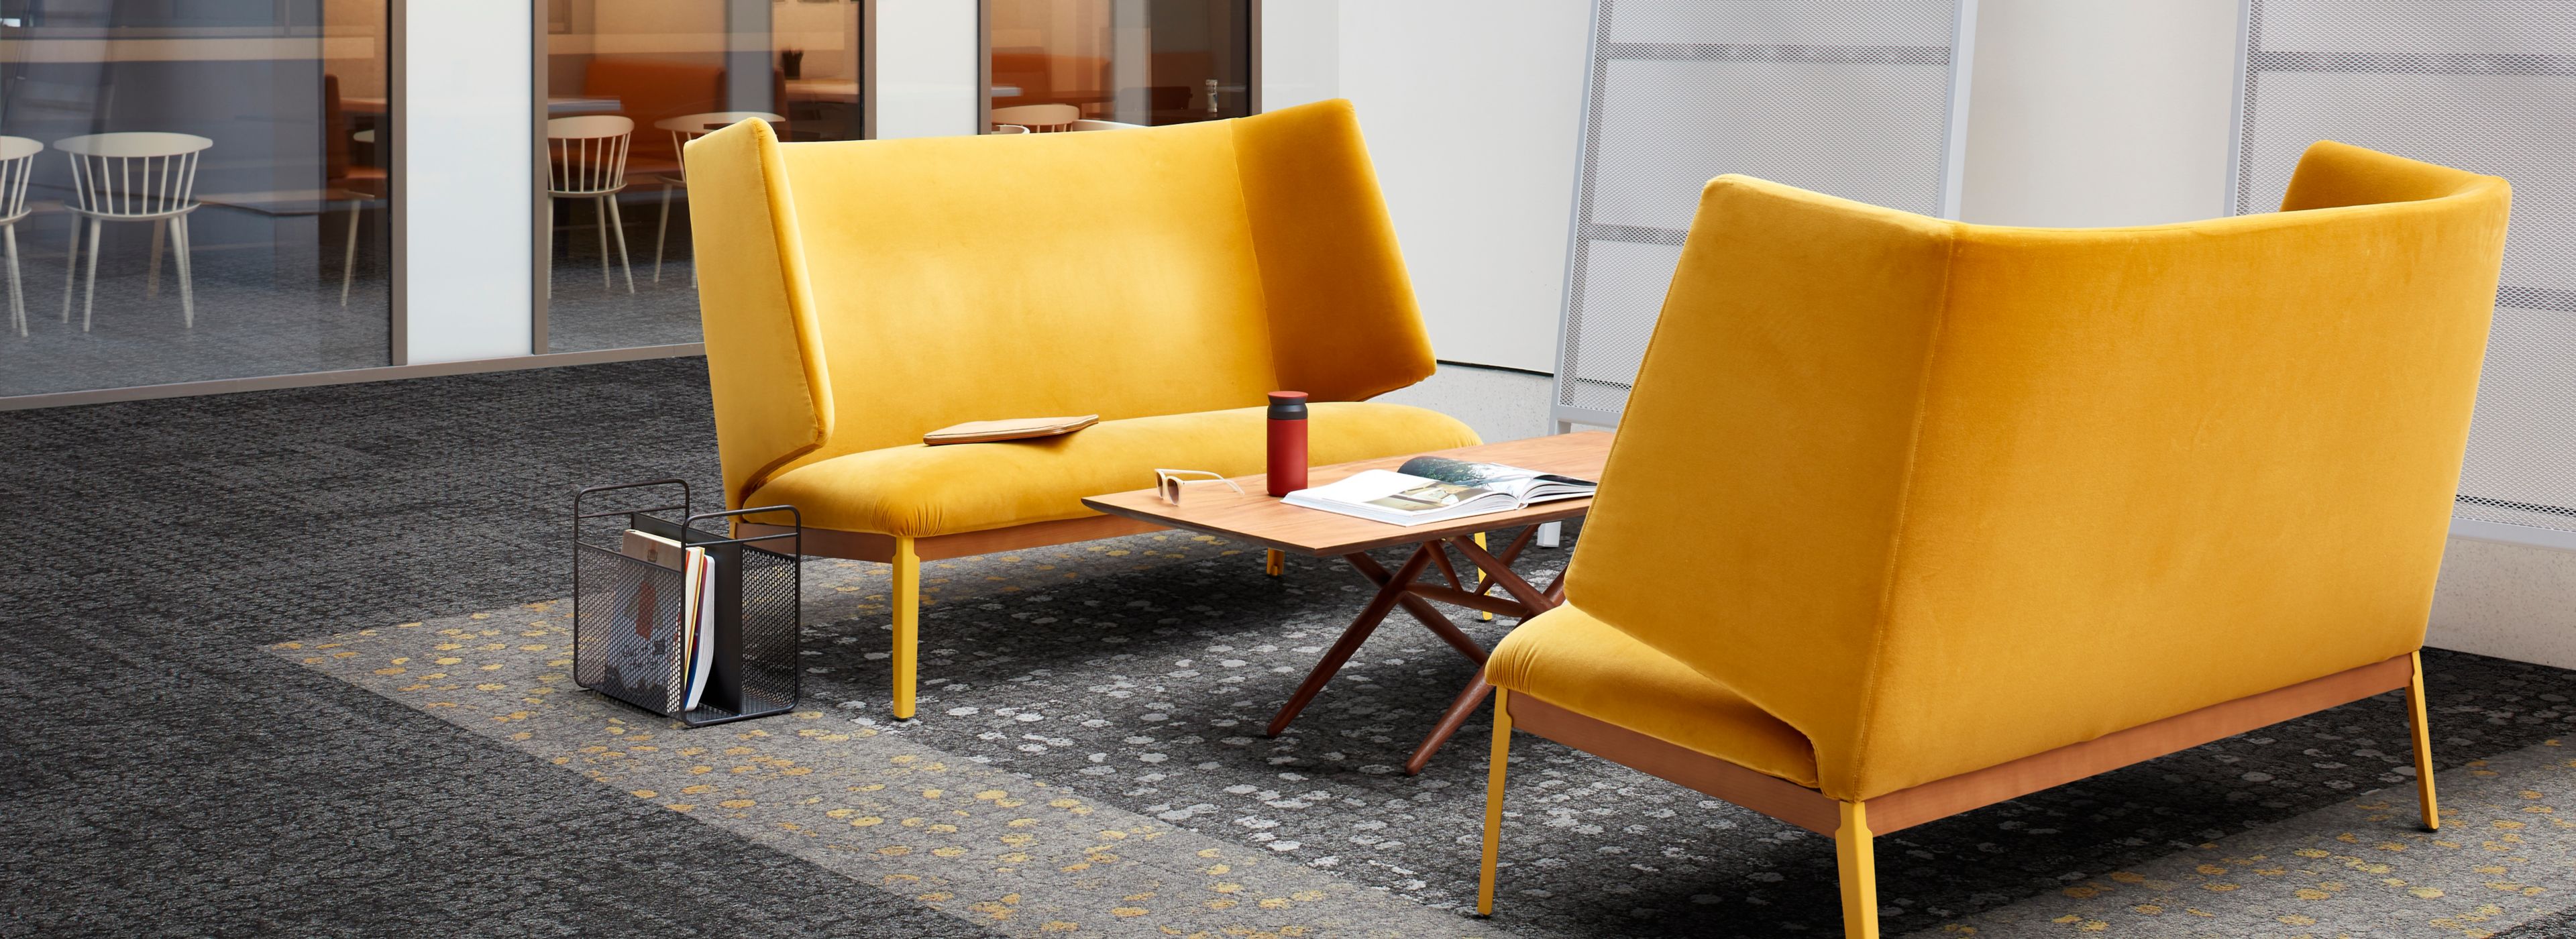 Interface Mercer Street and Broome Street carpet tile in seating area with two yellow couches image number 1